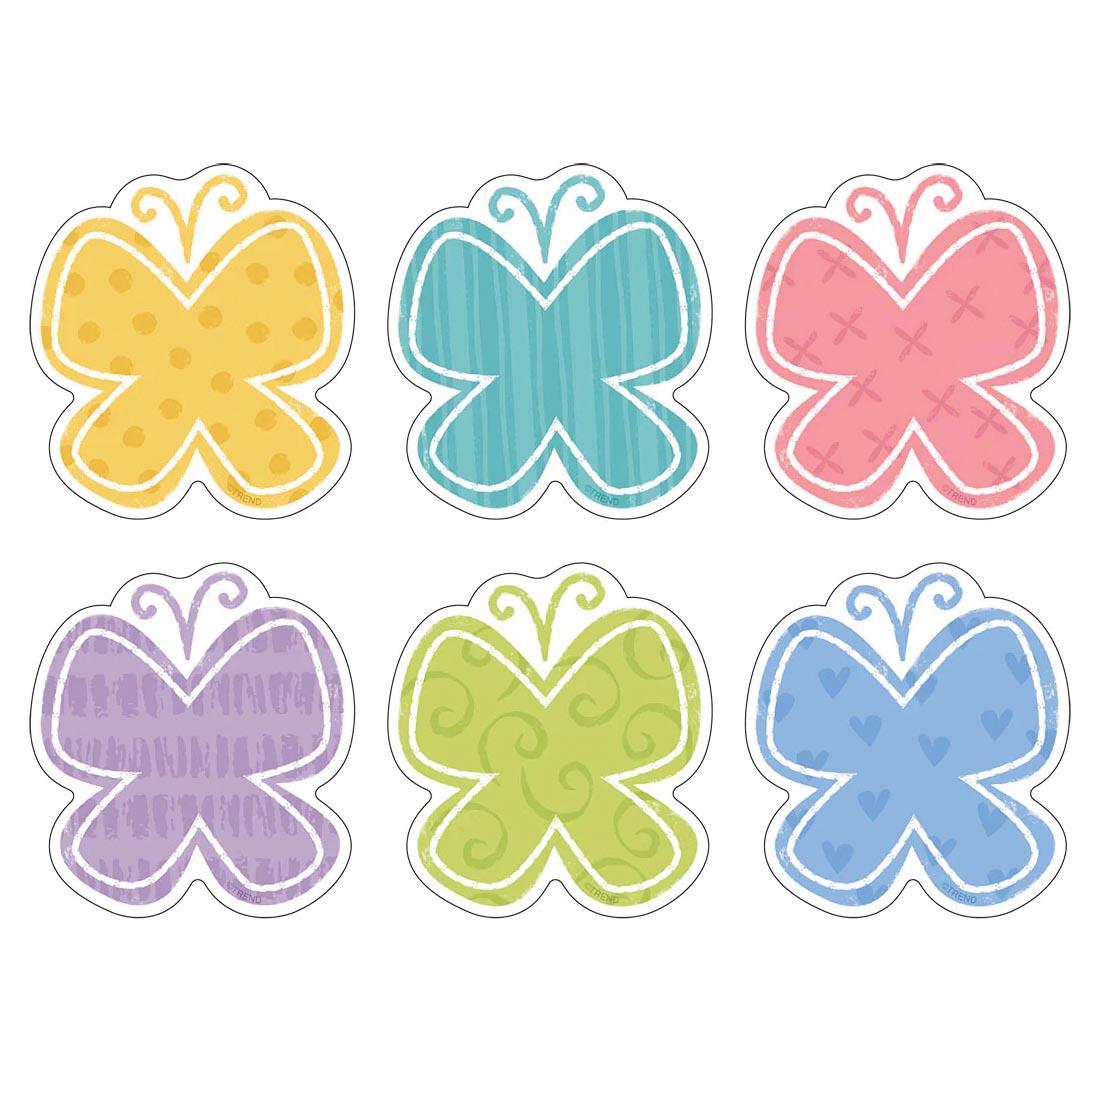 Six Garden Butterflies Mini Accents from the Good To Grow collection by TREND